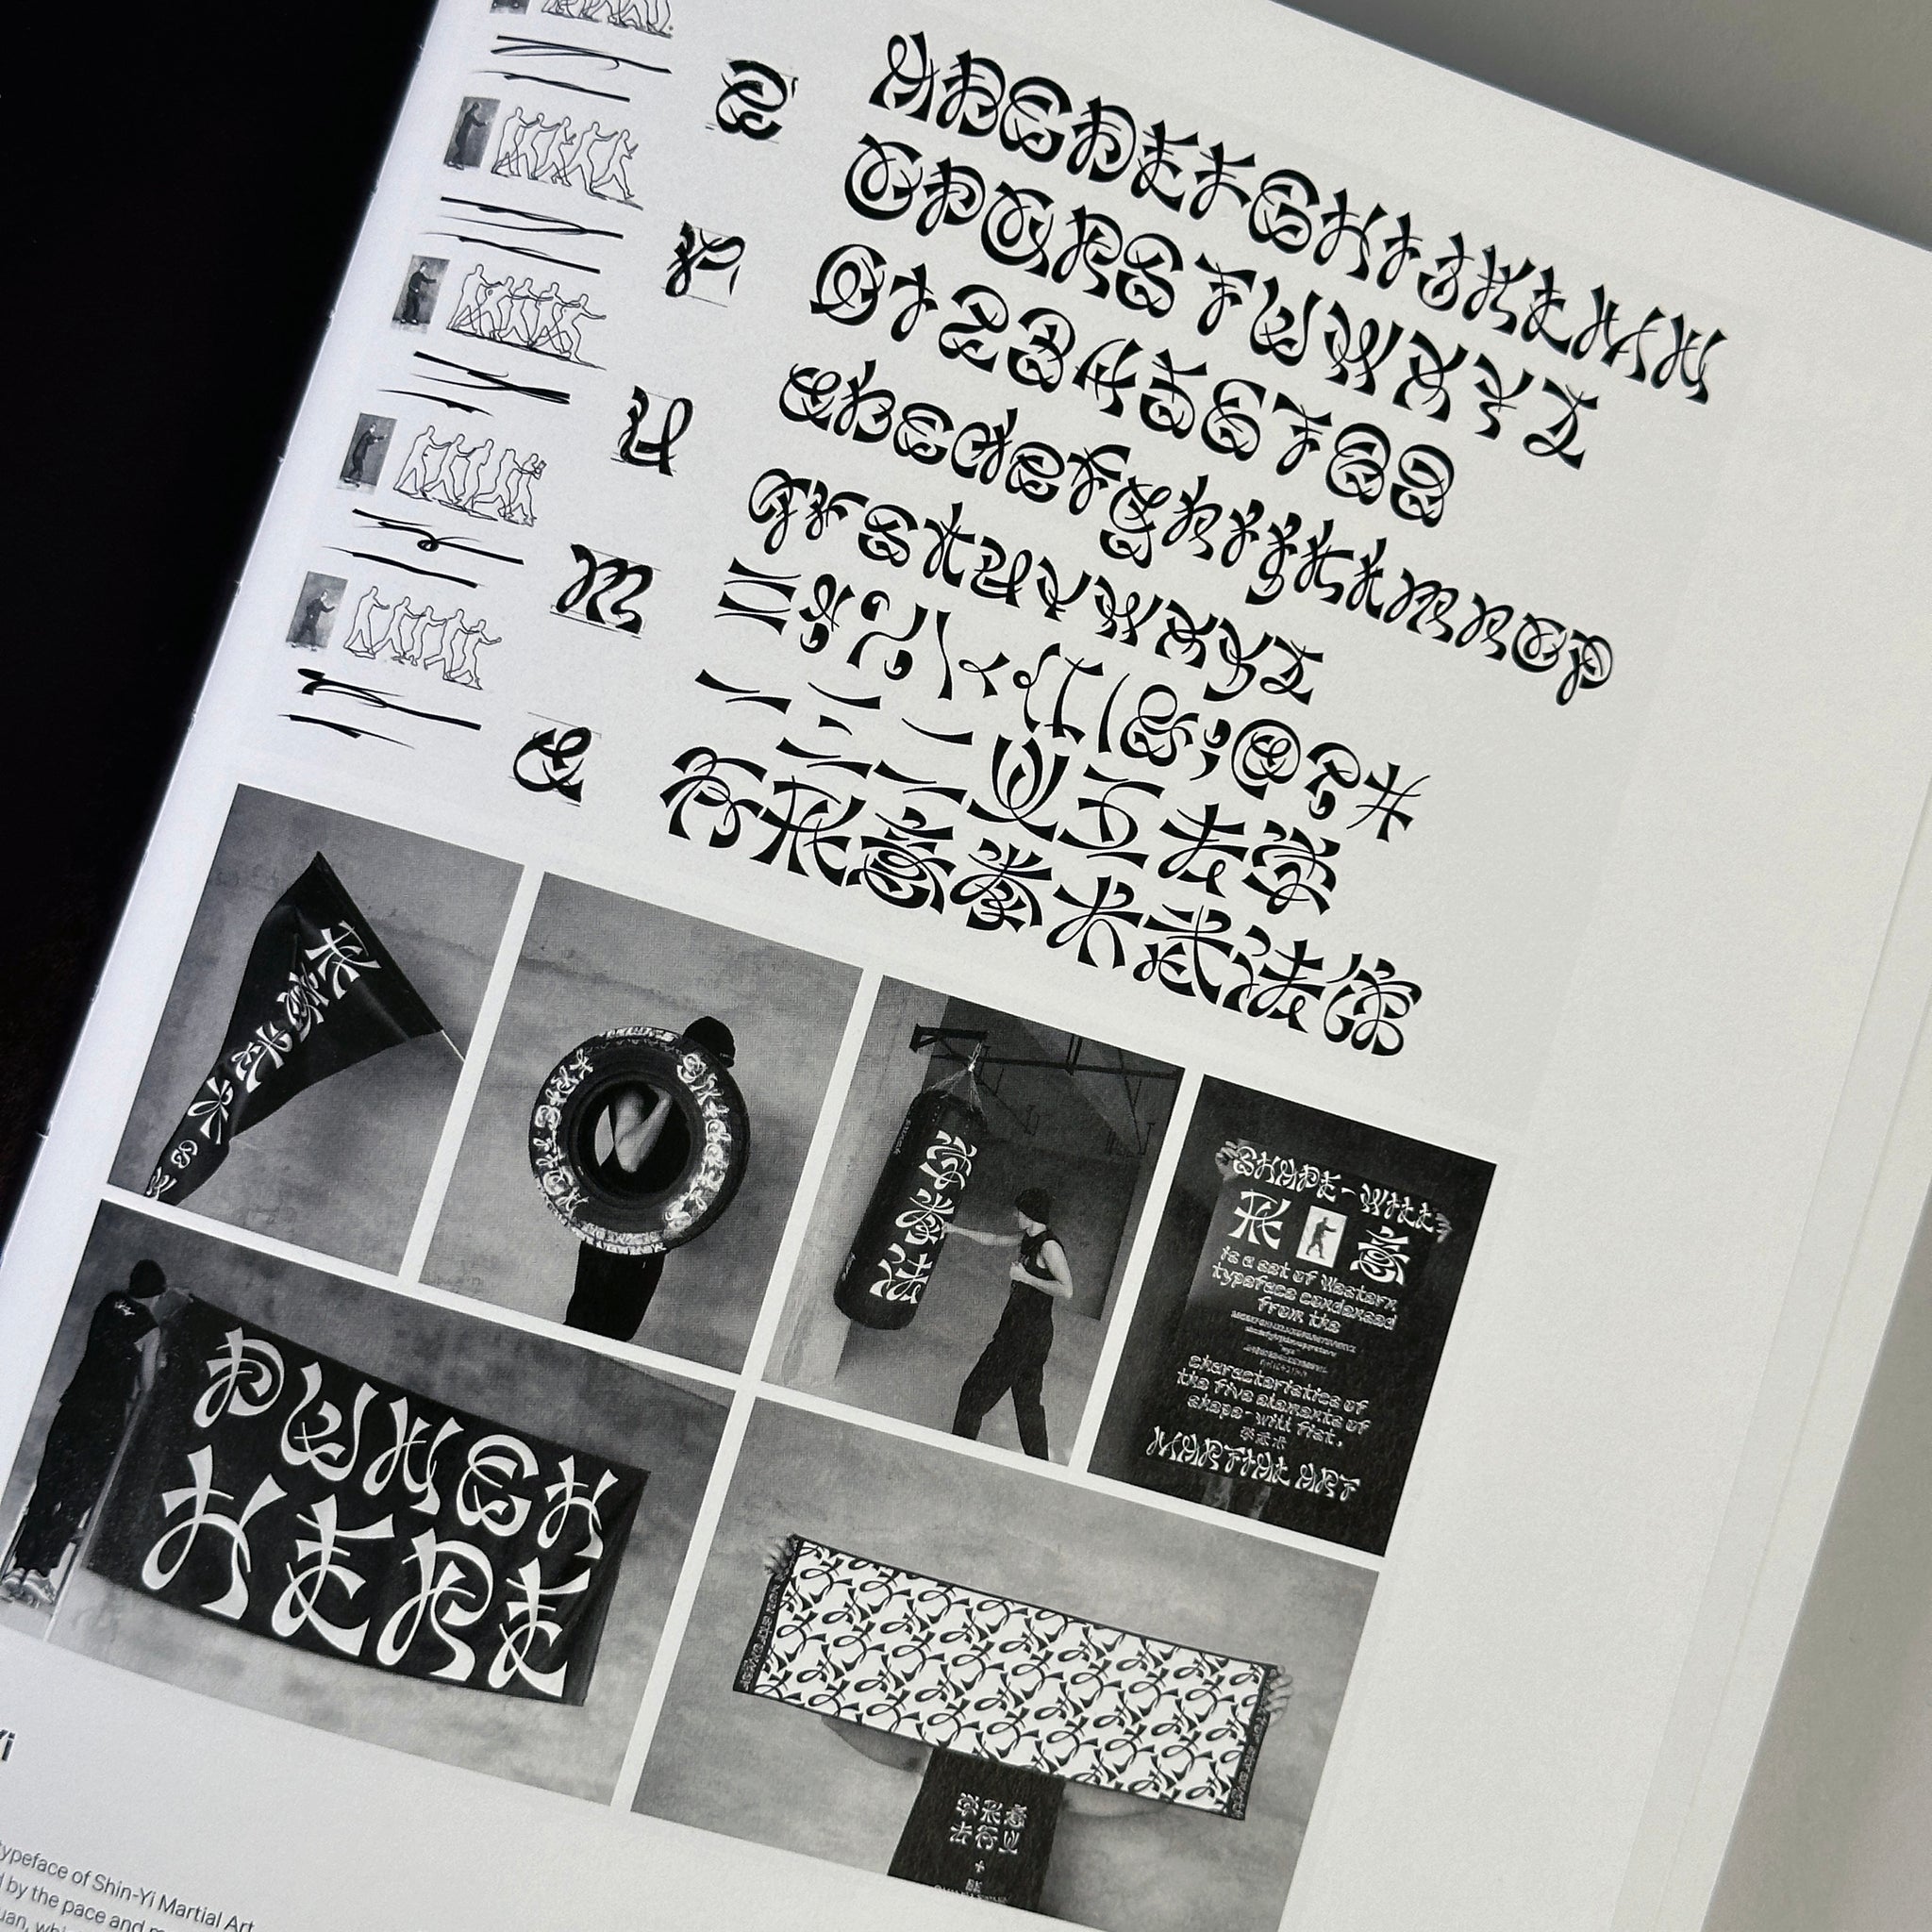 The World’s Best Typography: The 44th Annual of the Type Directors Club 2023